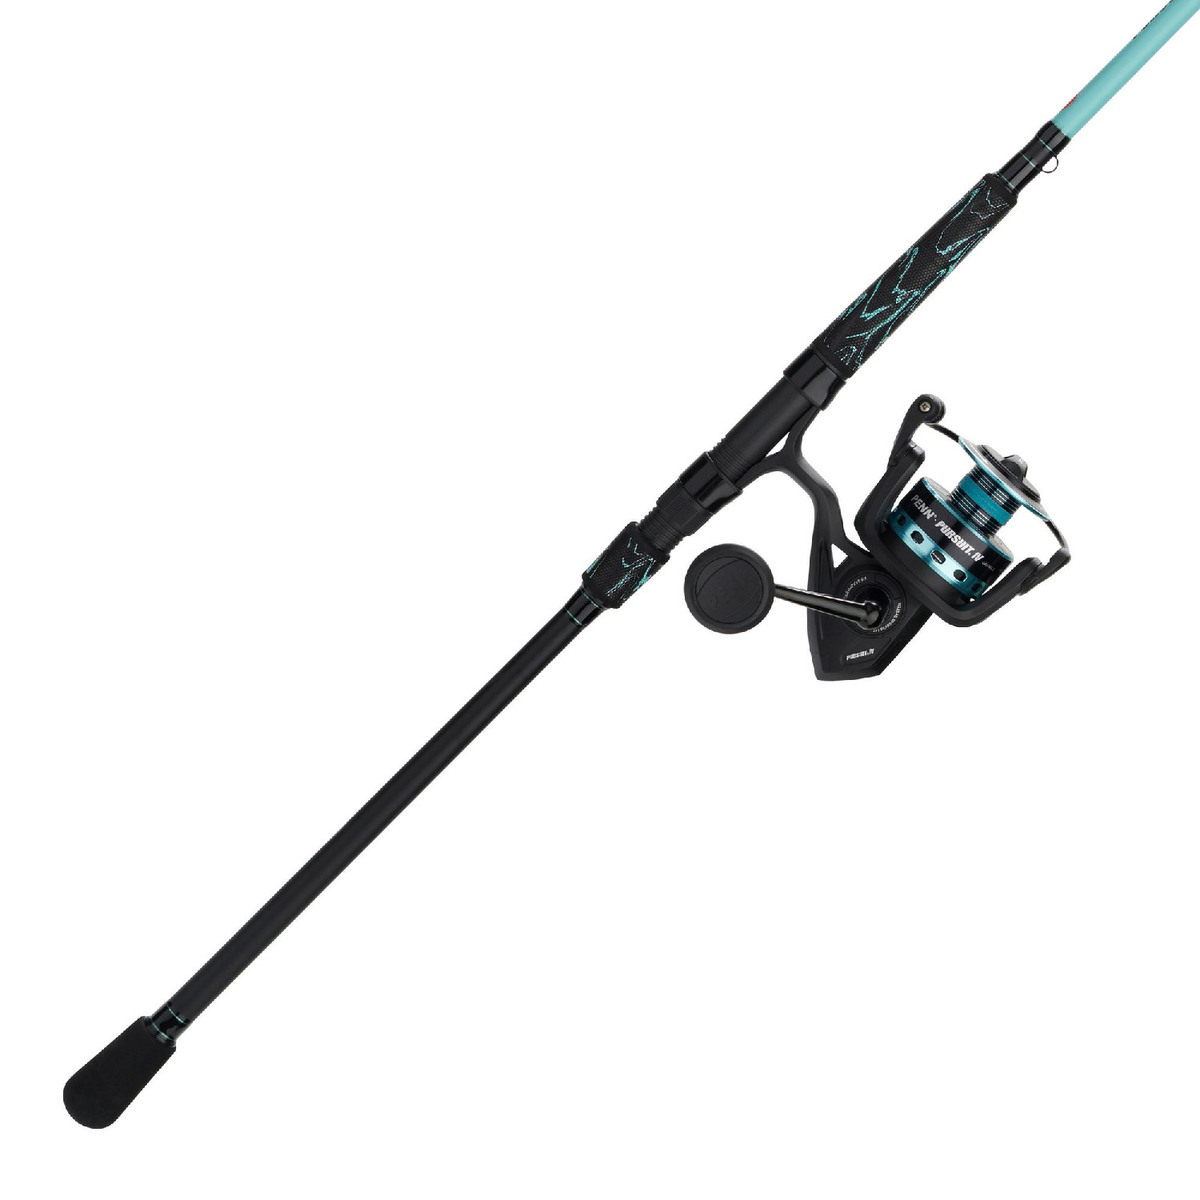 Okuma CX Series 7ft Spinning Rod and Reel Combo - Black Grey White Silver Red by Sportsman's Warehouse